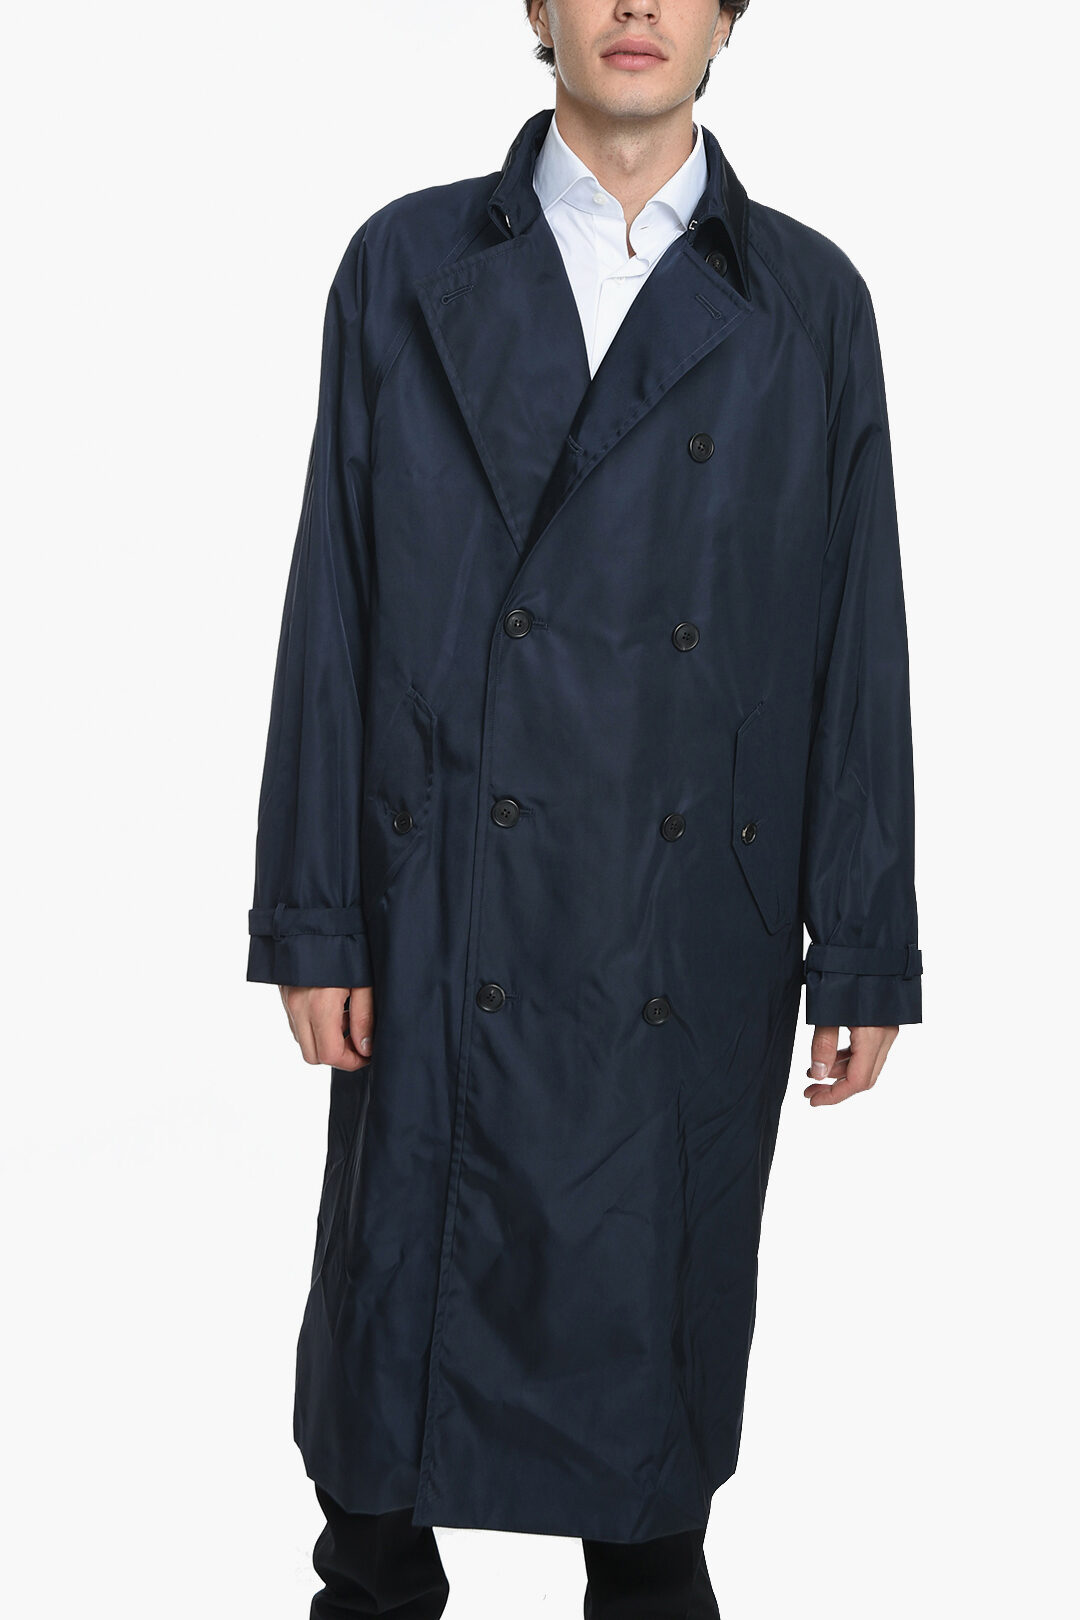 Prada Nylon Double-breasted Trench with Raglan Sleeves men - Glamood Outlet